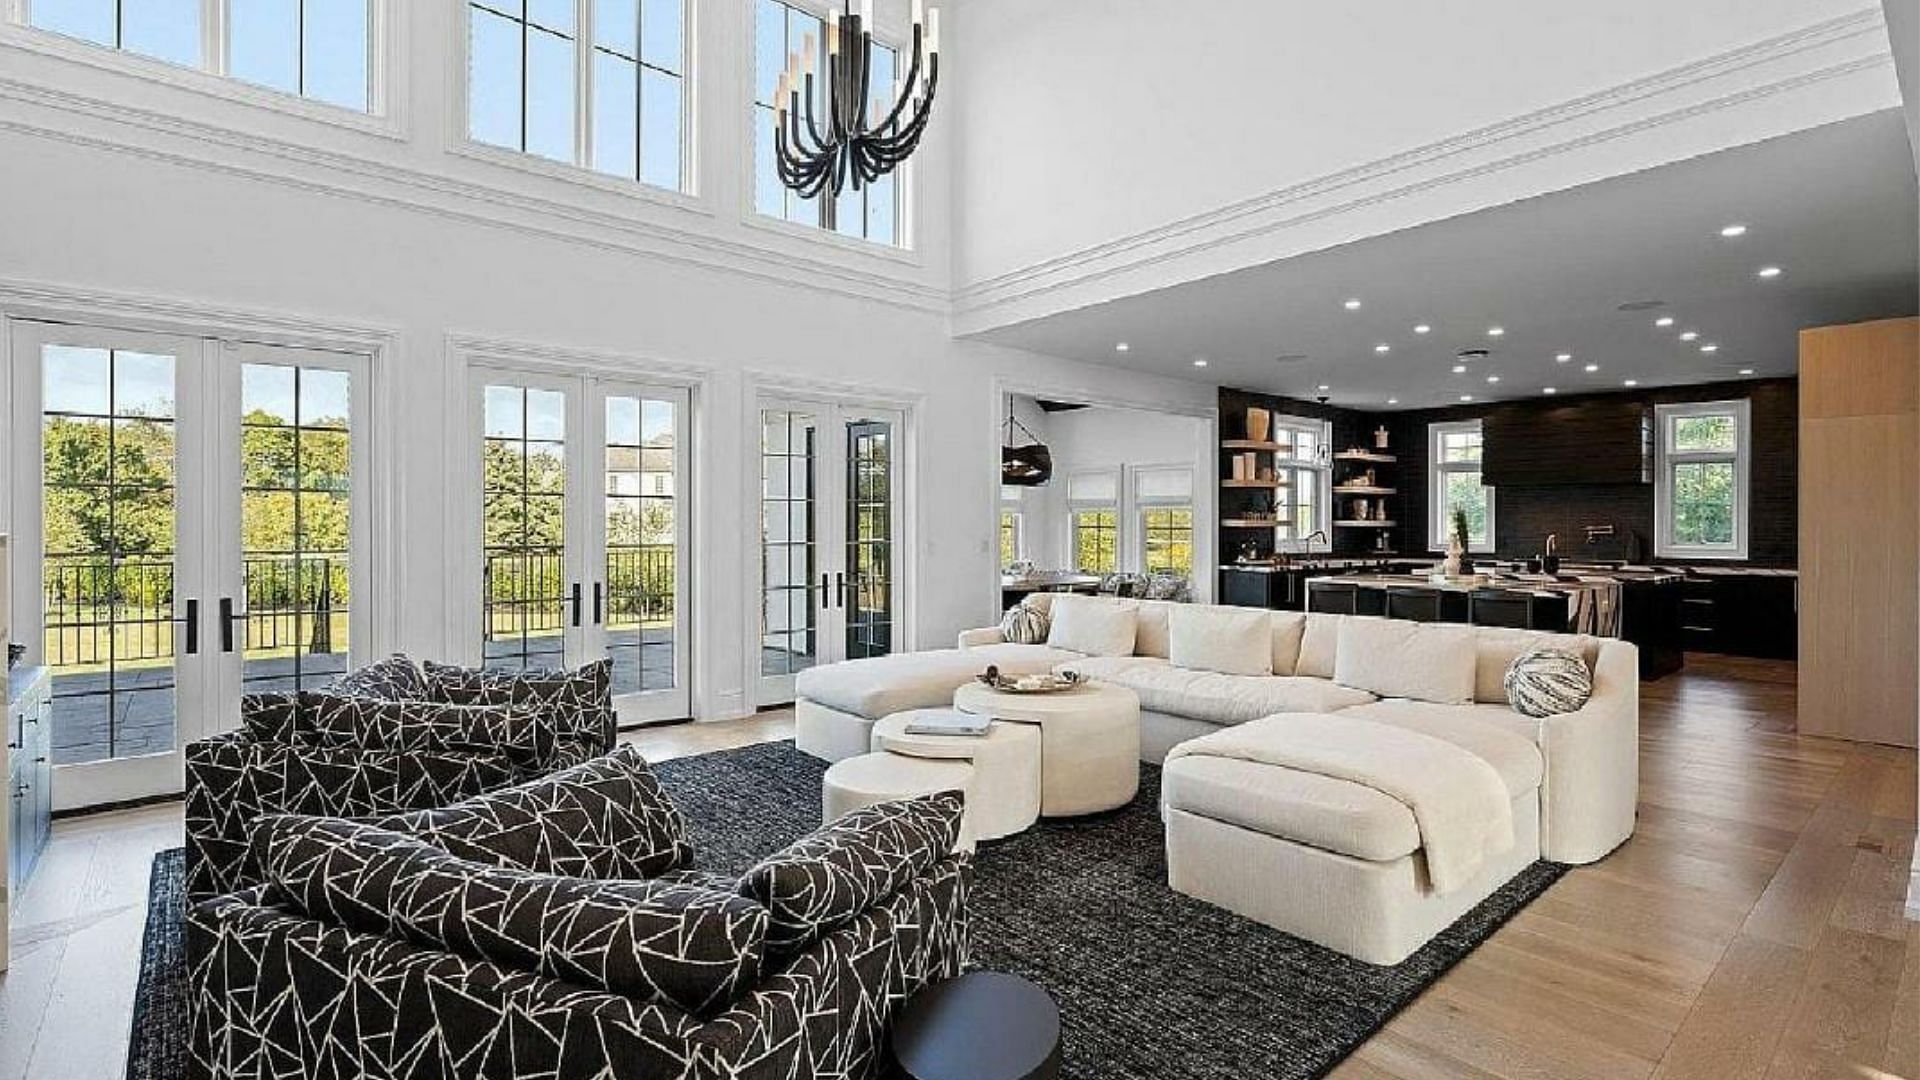 In Photos: Nick Castellanos and his lavish $4,500,000 New Jersey mansion,  formerly owned by NBA All-Star Ben Simmons